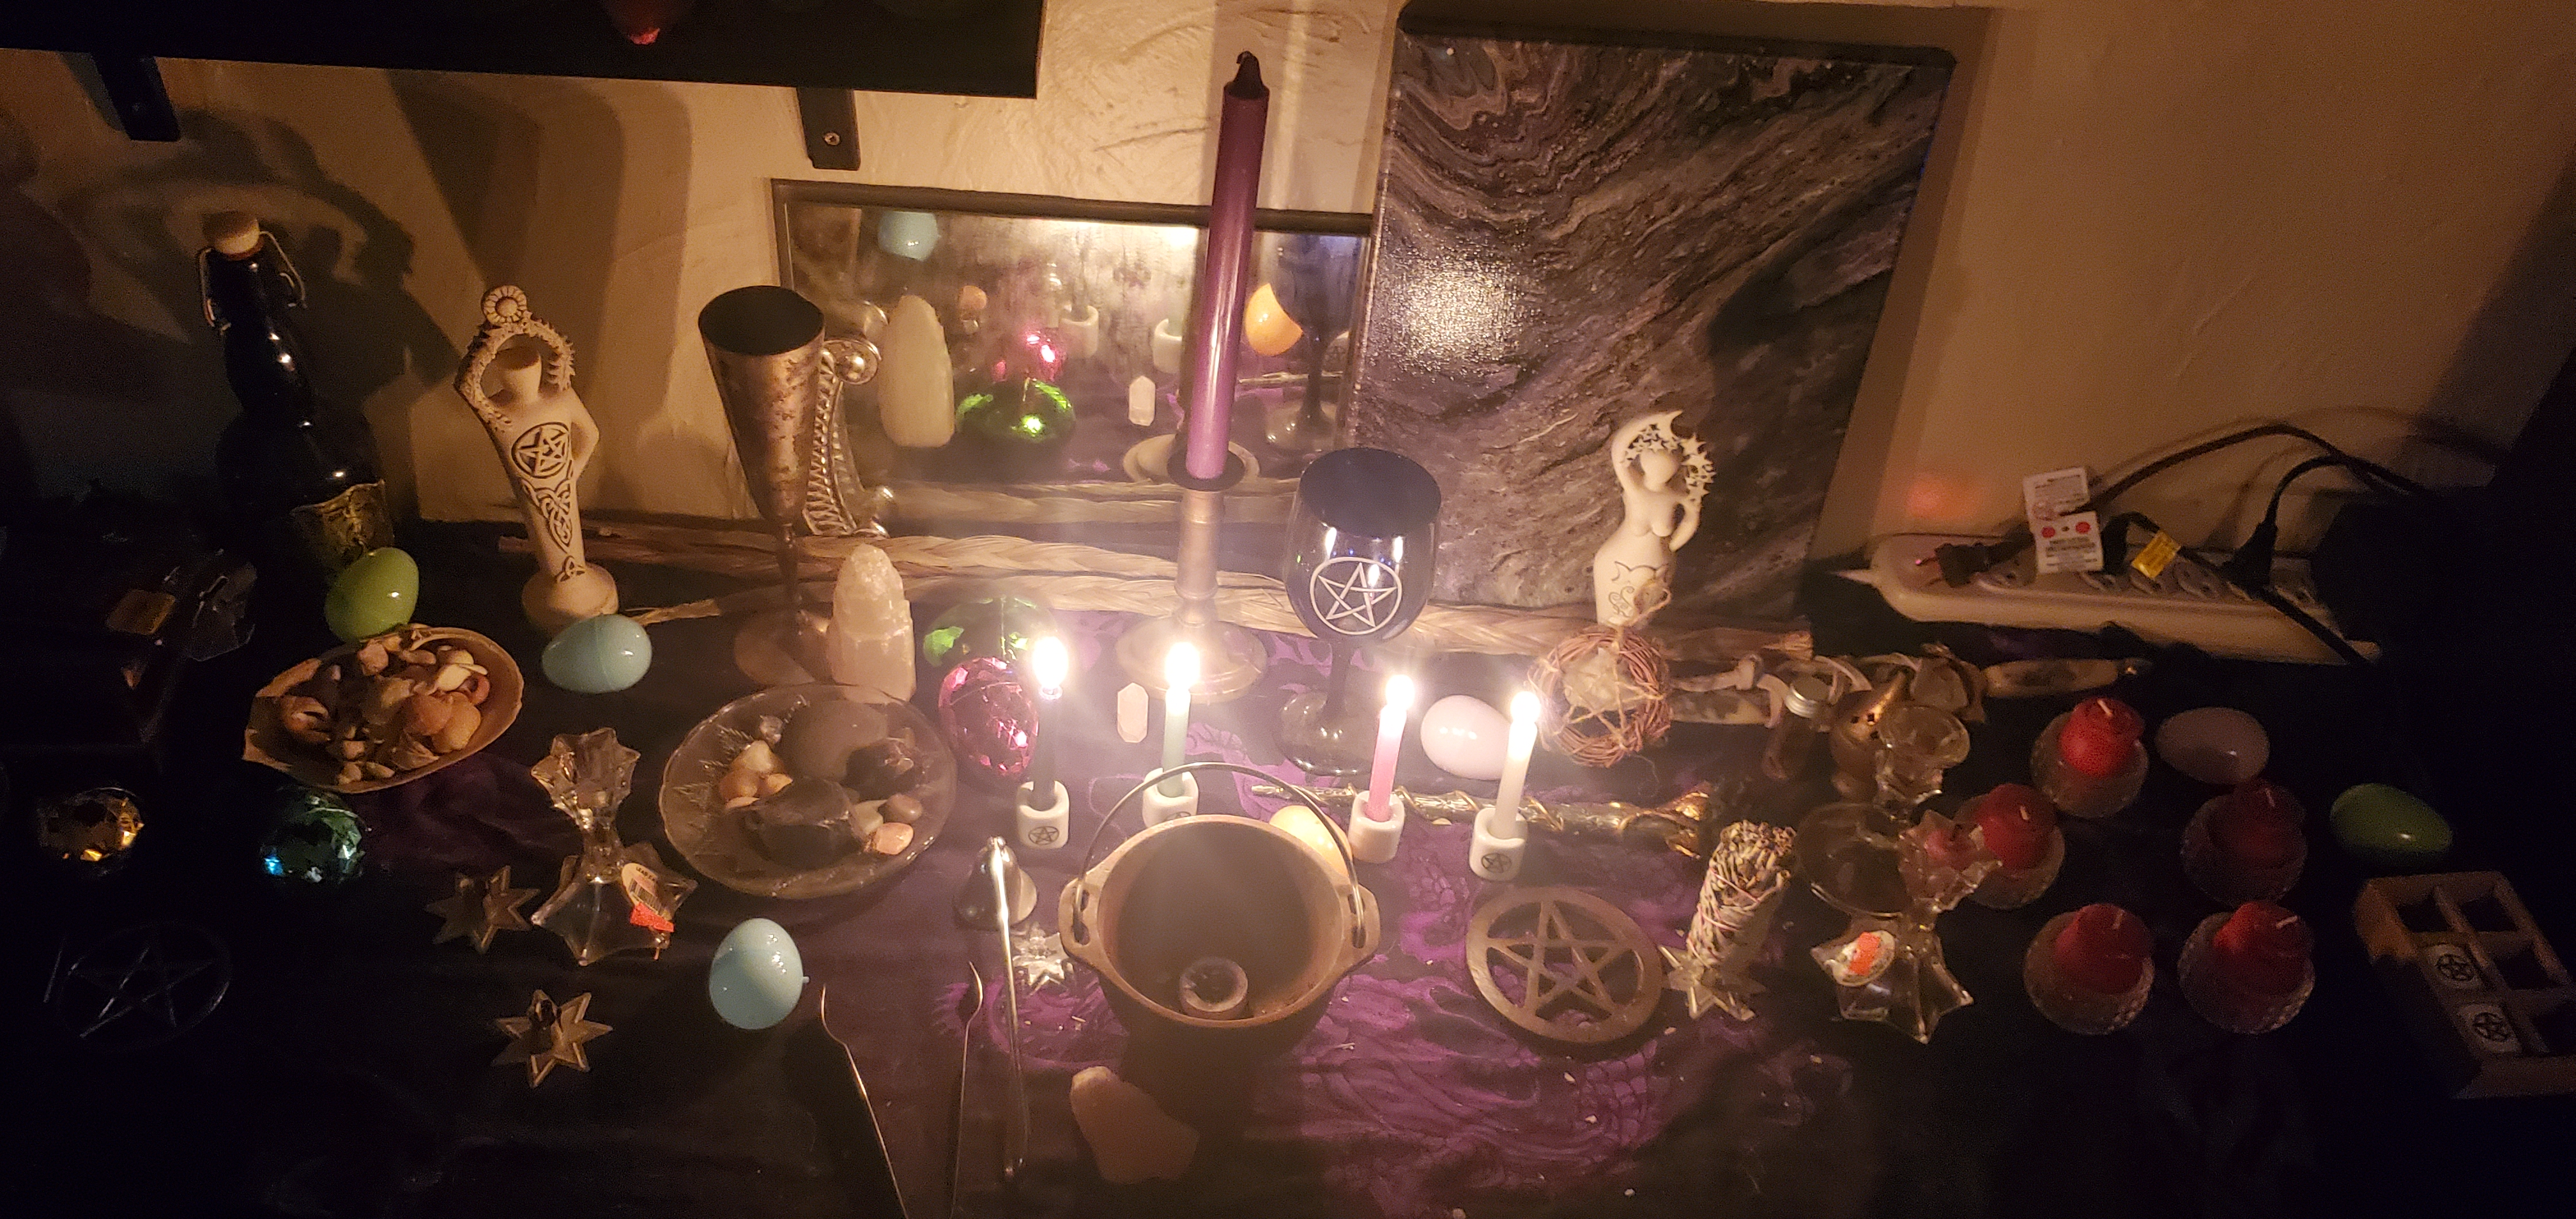 Di's altar during an Ostara working. Plastic eggs, a cast iron cauldron, lit chime candles, a wooden pentacle, god and goddess statues,& a cobalt glass chalice